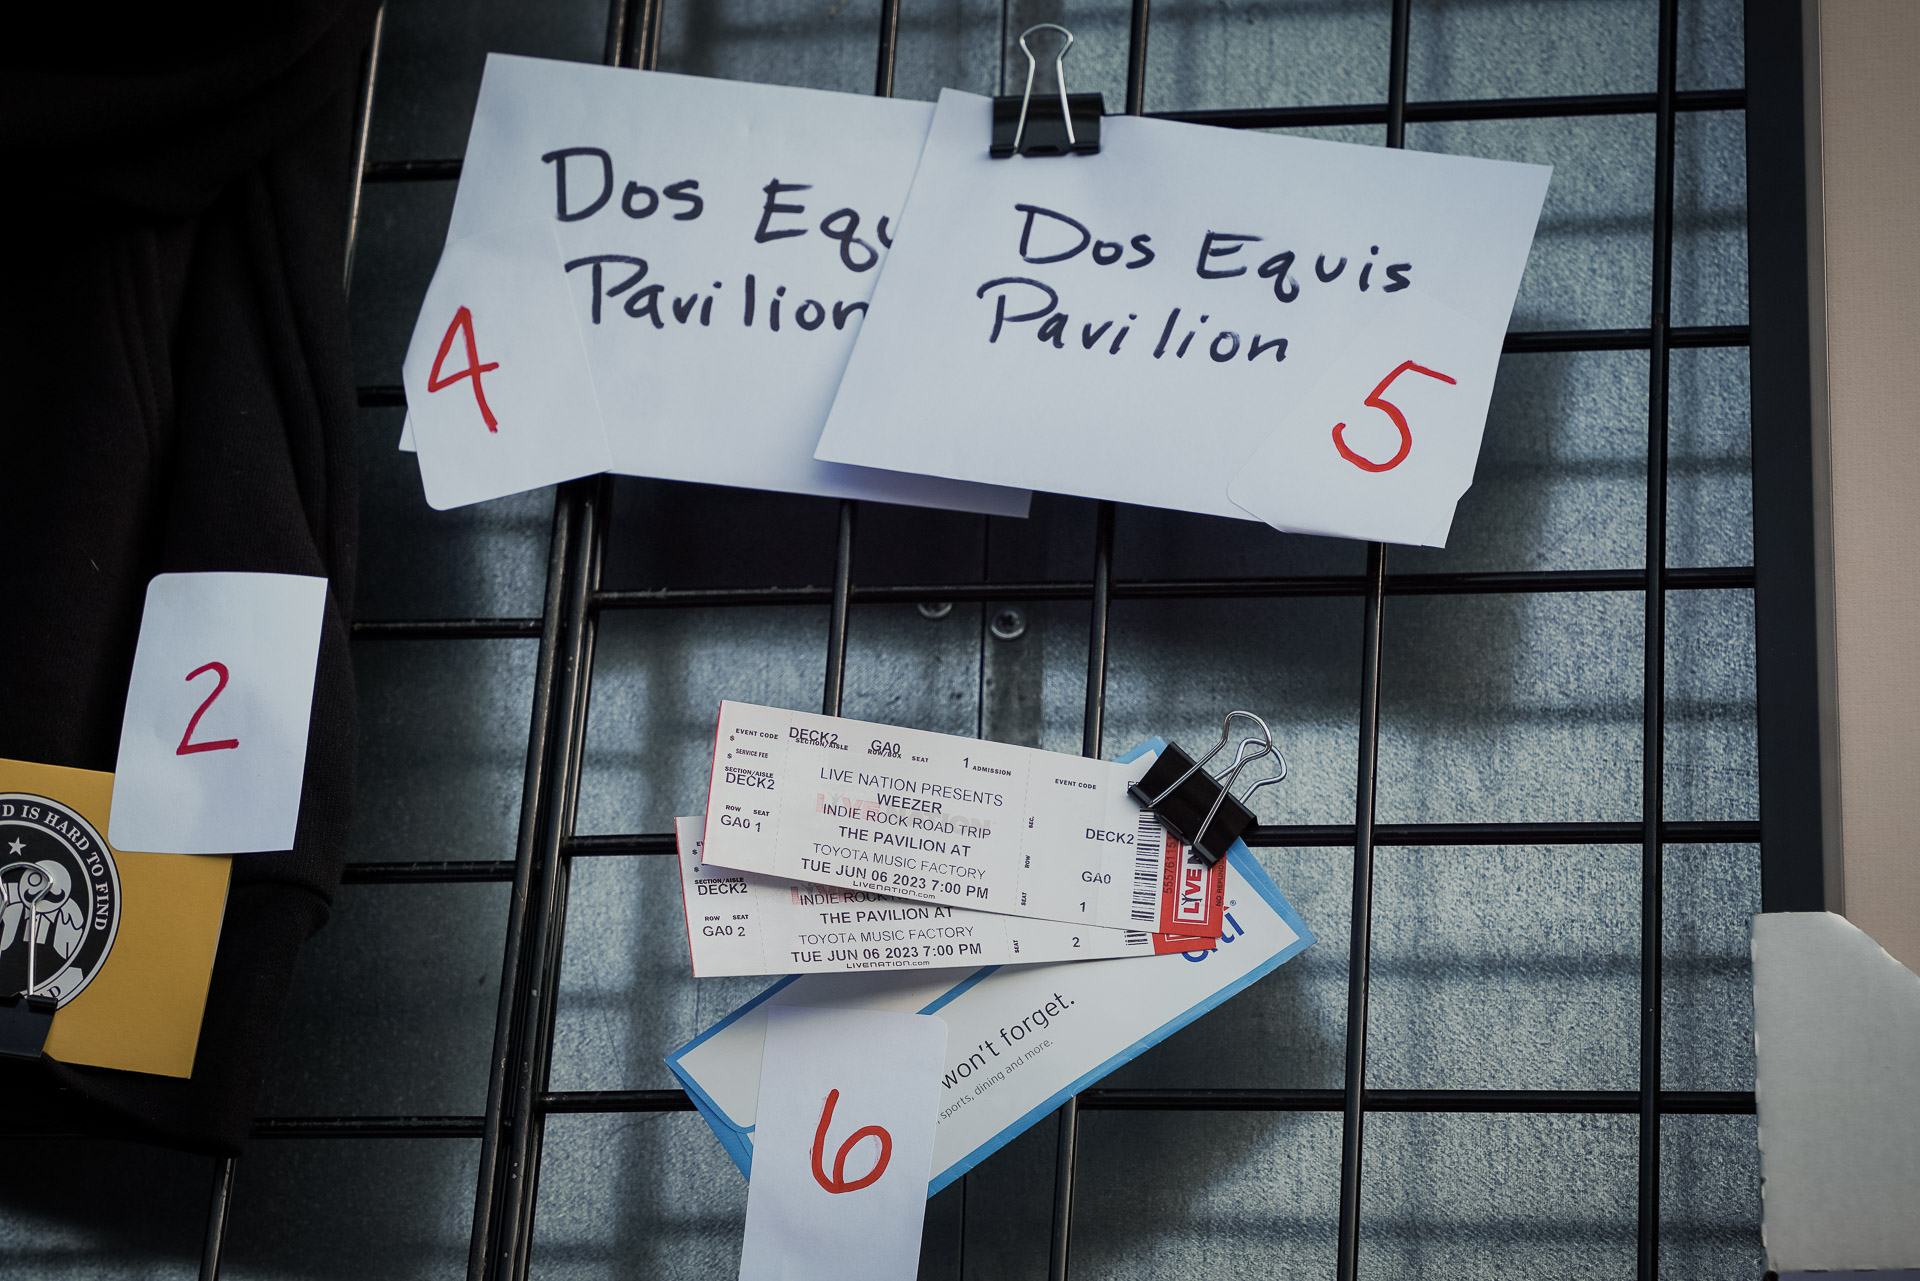 Envelopes that say "Dos Equis Pavilion" and concert tickets on a wall